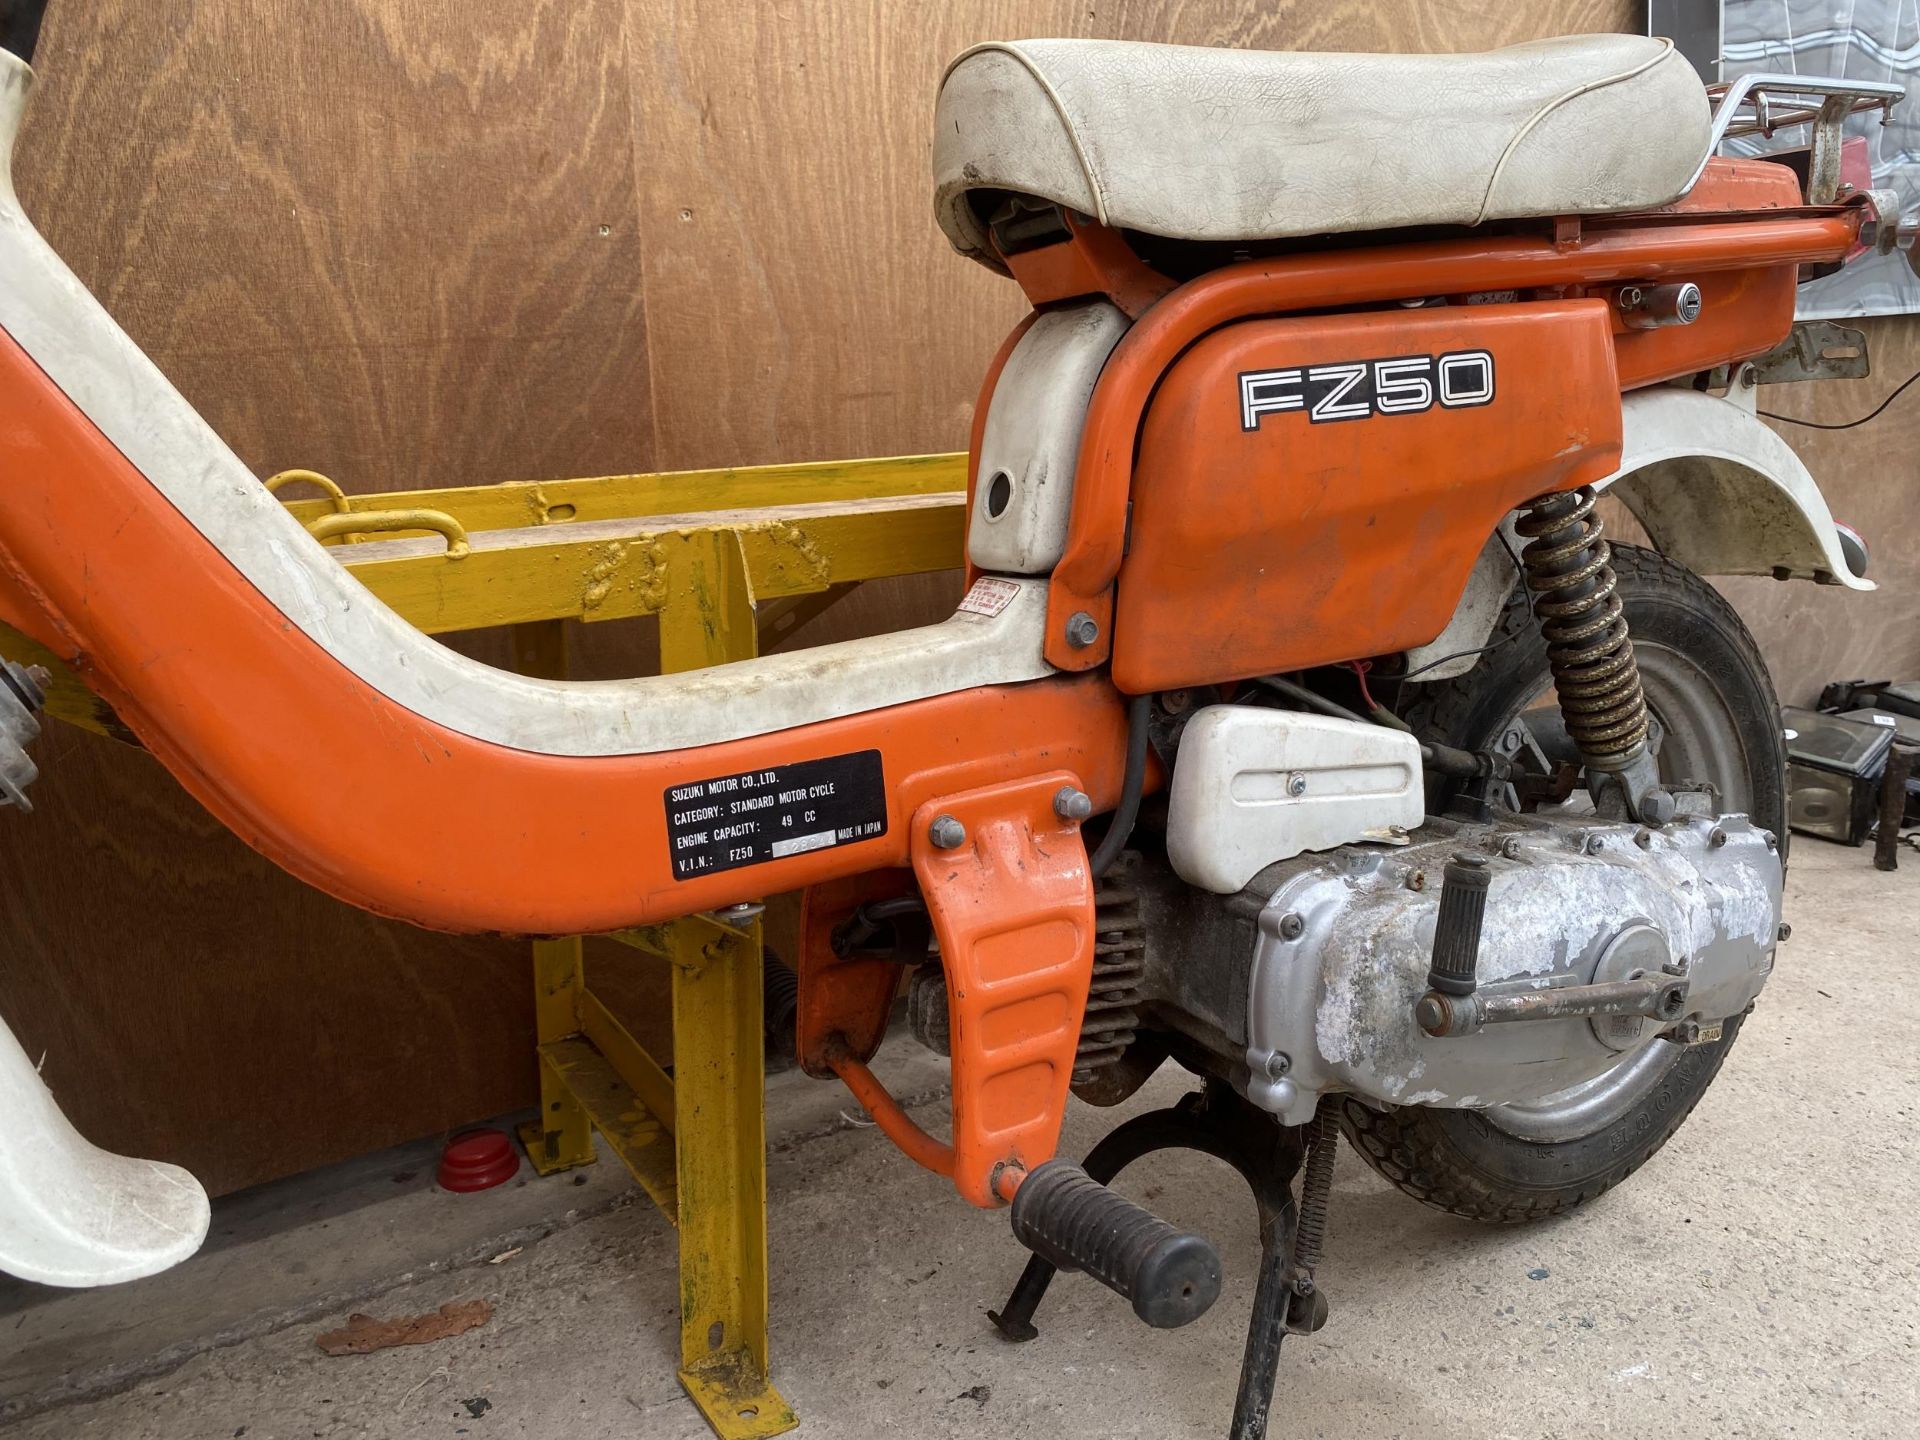 A FZ50 SUZUKI WITH LOG BOOK AND KEY,MILEAGE 611 MILES, REGISTRATION WNA 608X TO INCLUDE A HAND - Image 8 of 15